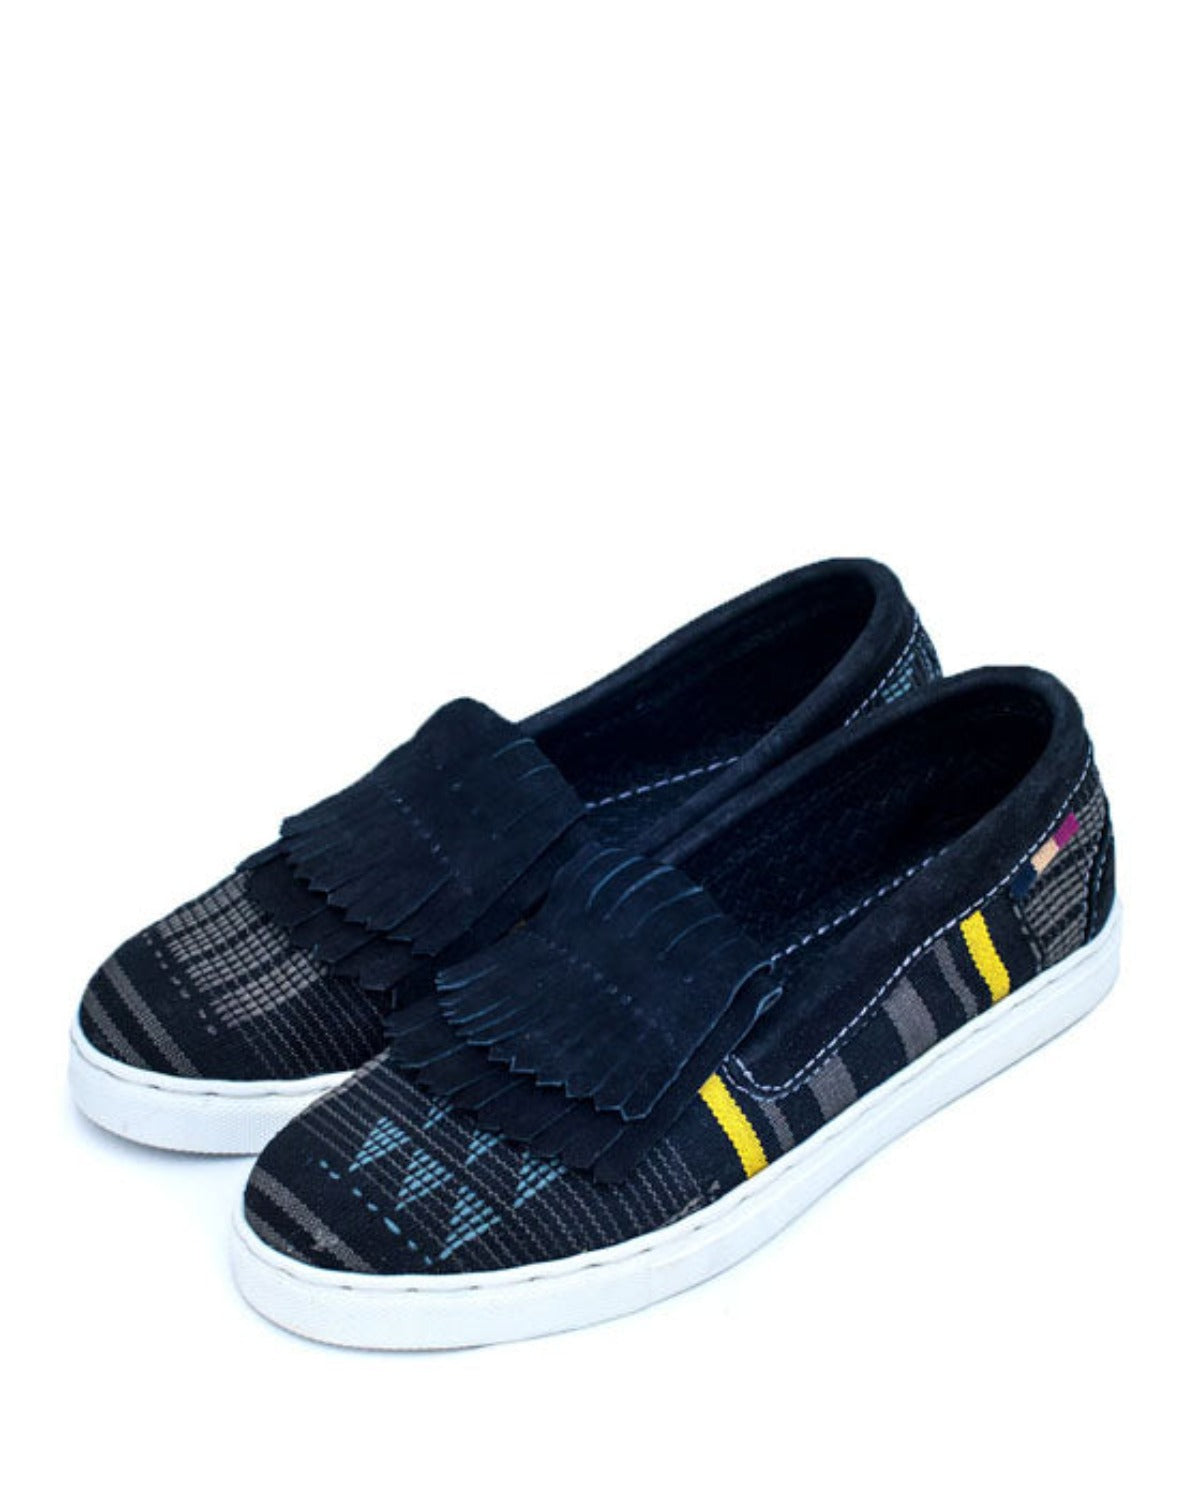 AMAROS BLACK SLIP-ON SNEAKERS WITH FRILLS